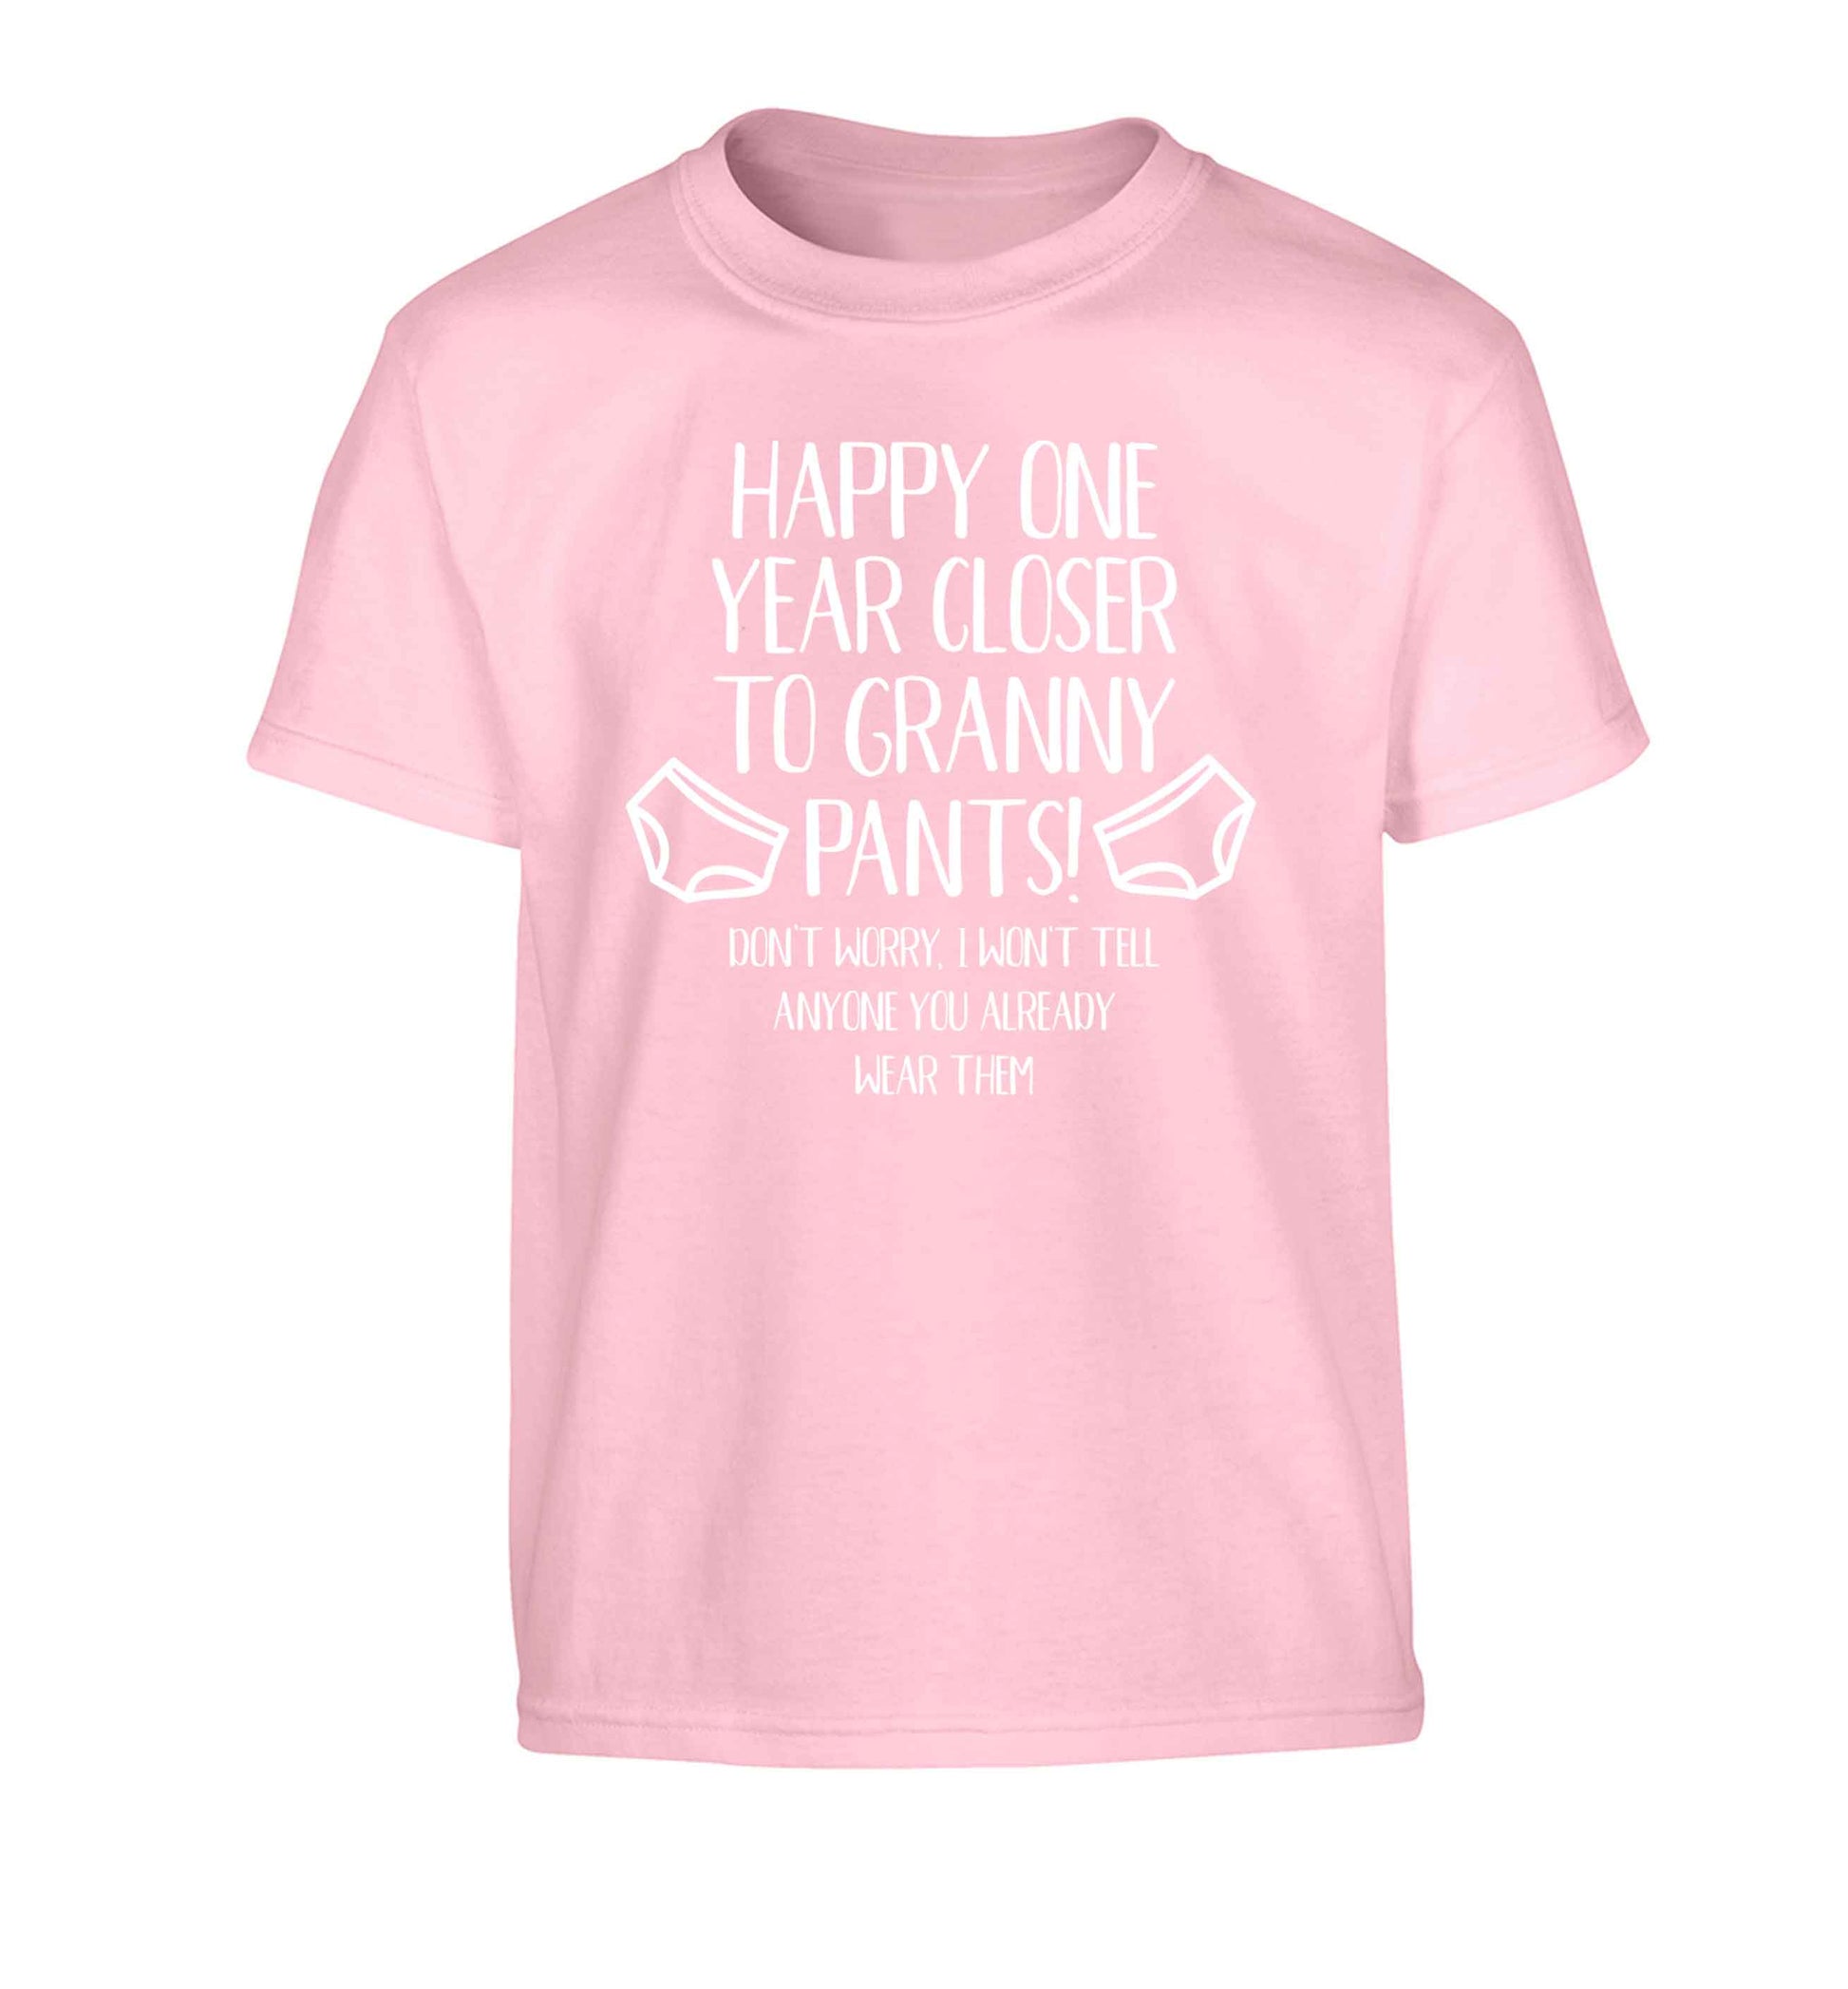 Happy one year closer to granny pants Children's light pink Tshirt 12-13 Years